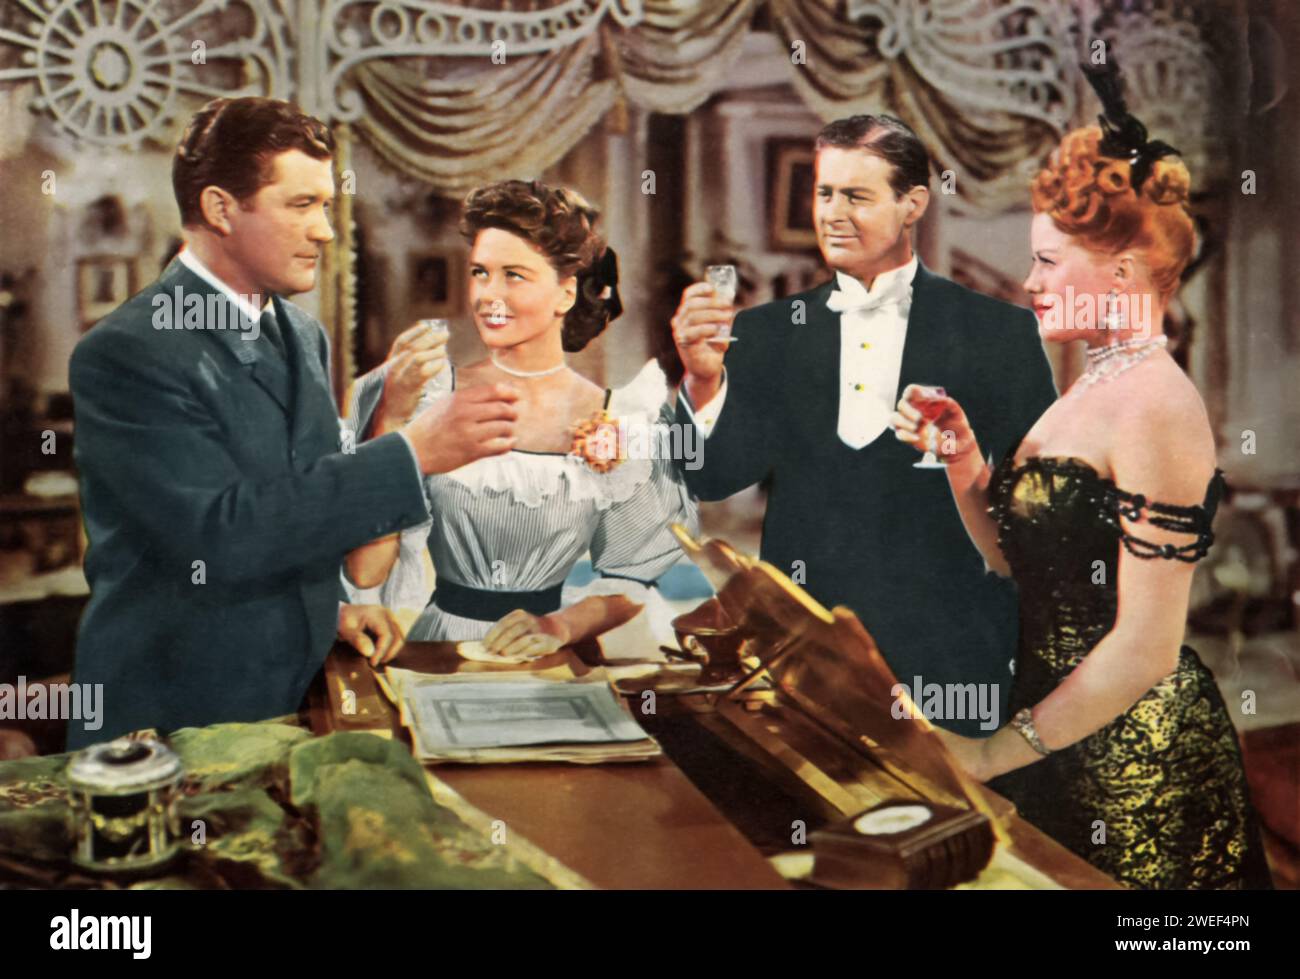 Dennis Morgan, Dorothy Malone, Don DeFore, and Janis Paige star in 'One Sunday Afternoon' (1948), a nostalgic musical comedy. In the film, Morgan plays Biff Grimes, a man who reminisces about his past loves and friendships on a lazy Sunday afternoon. Malone portrays Virginia Brush, the object of Biff's affection, while DeFore and Paige play his friends, Hugo Barnstead and Amy Lind, respectively. Stock Photo